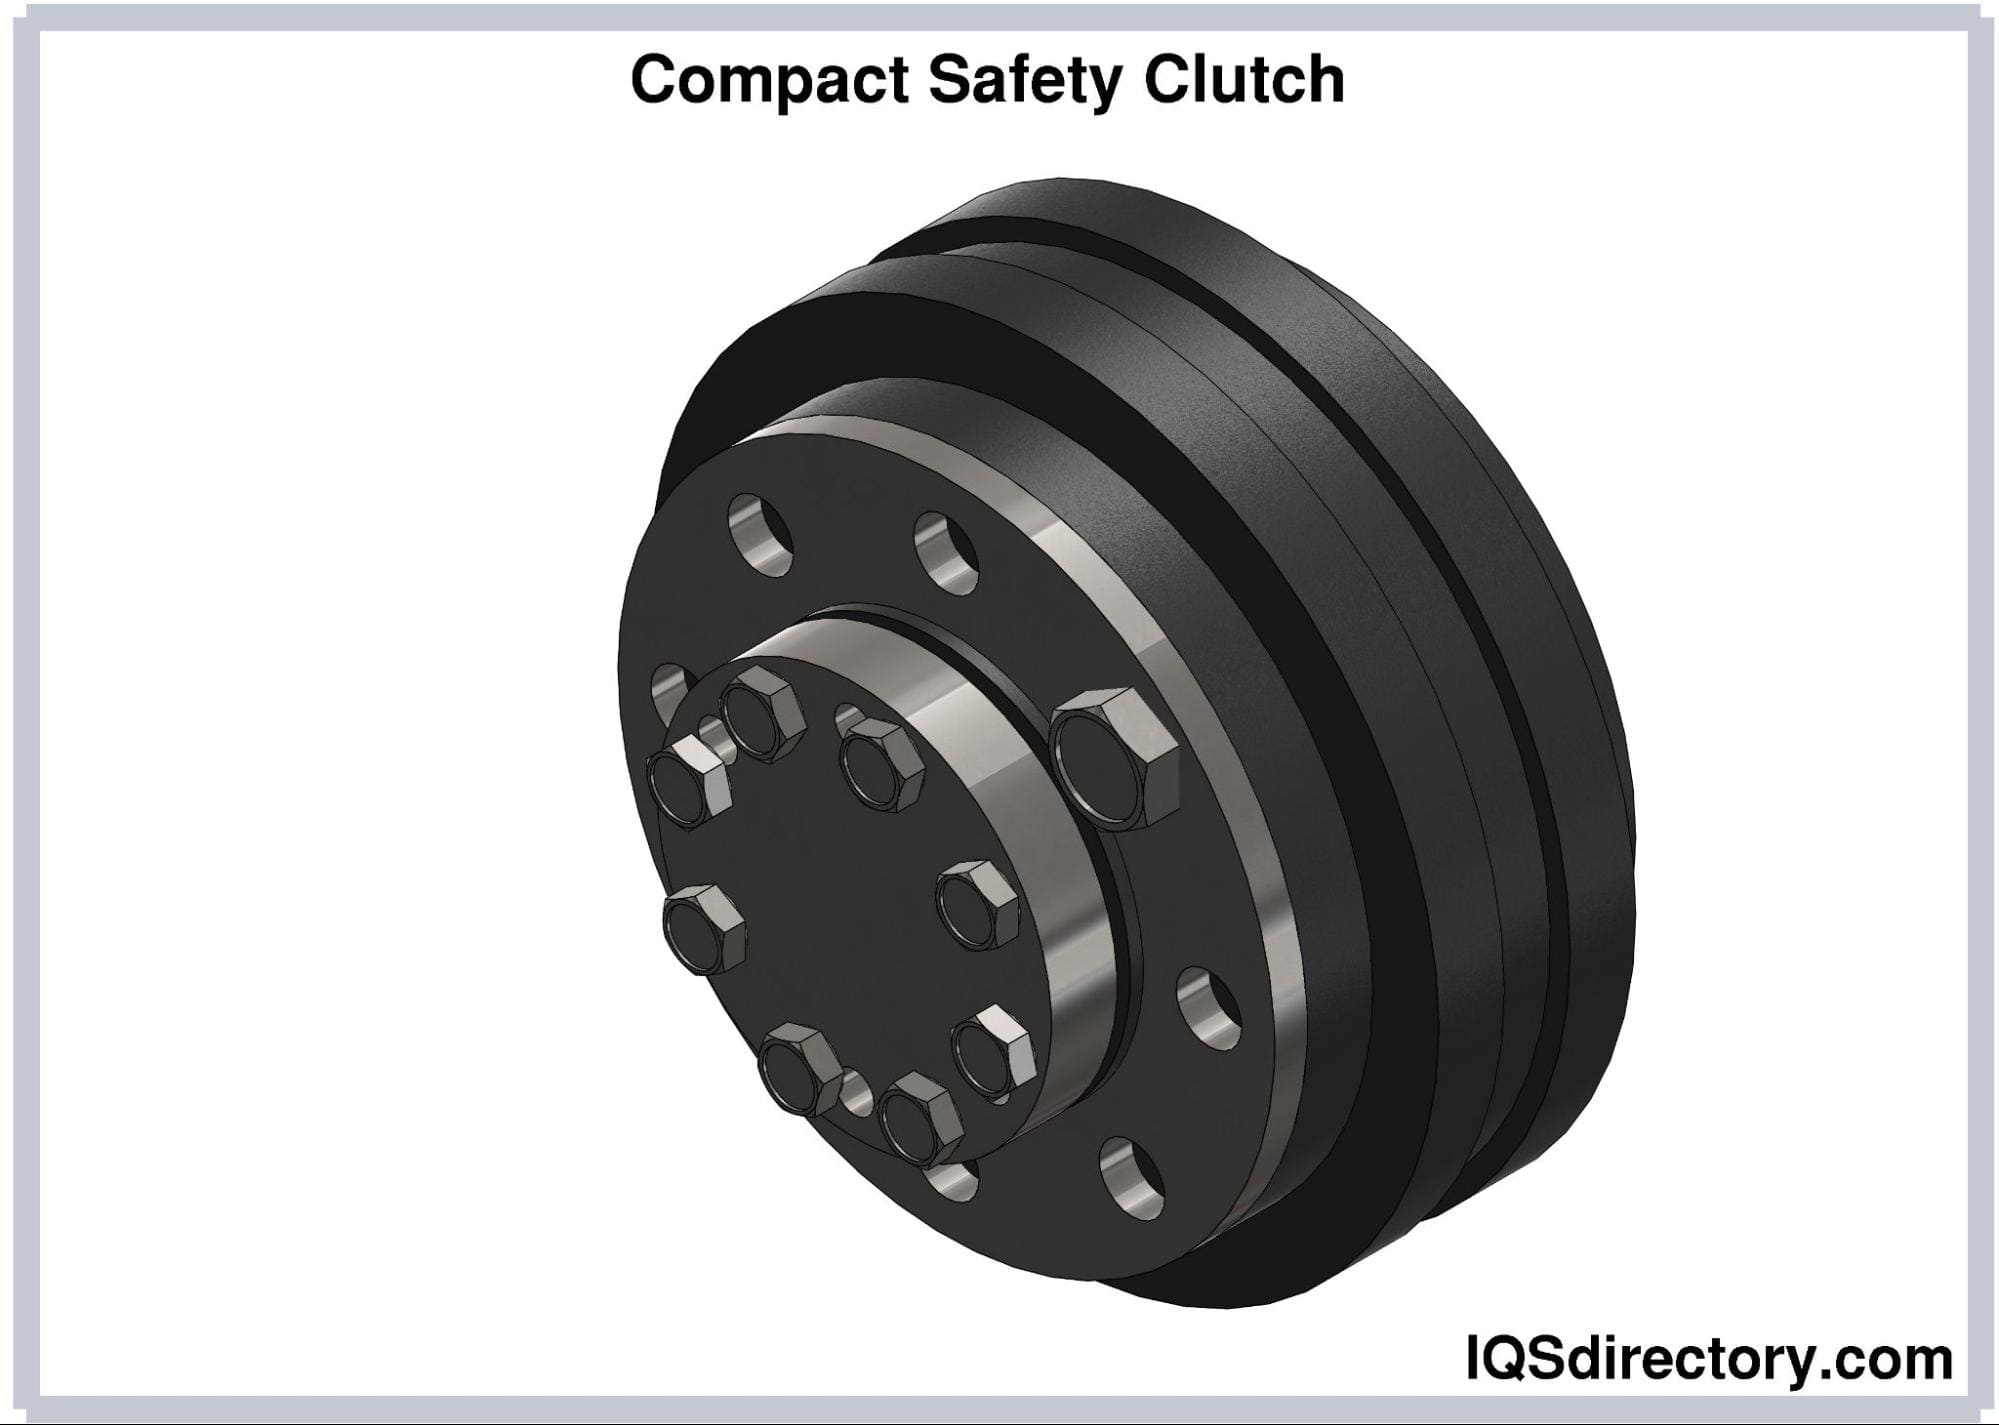 Compact Safety Clutch